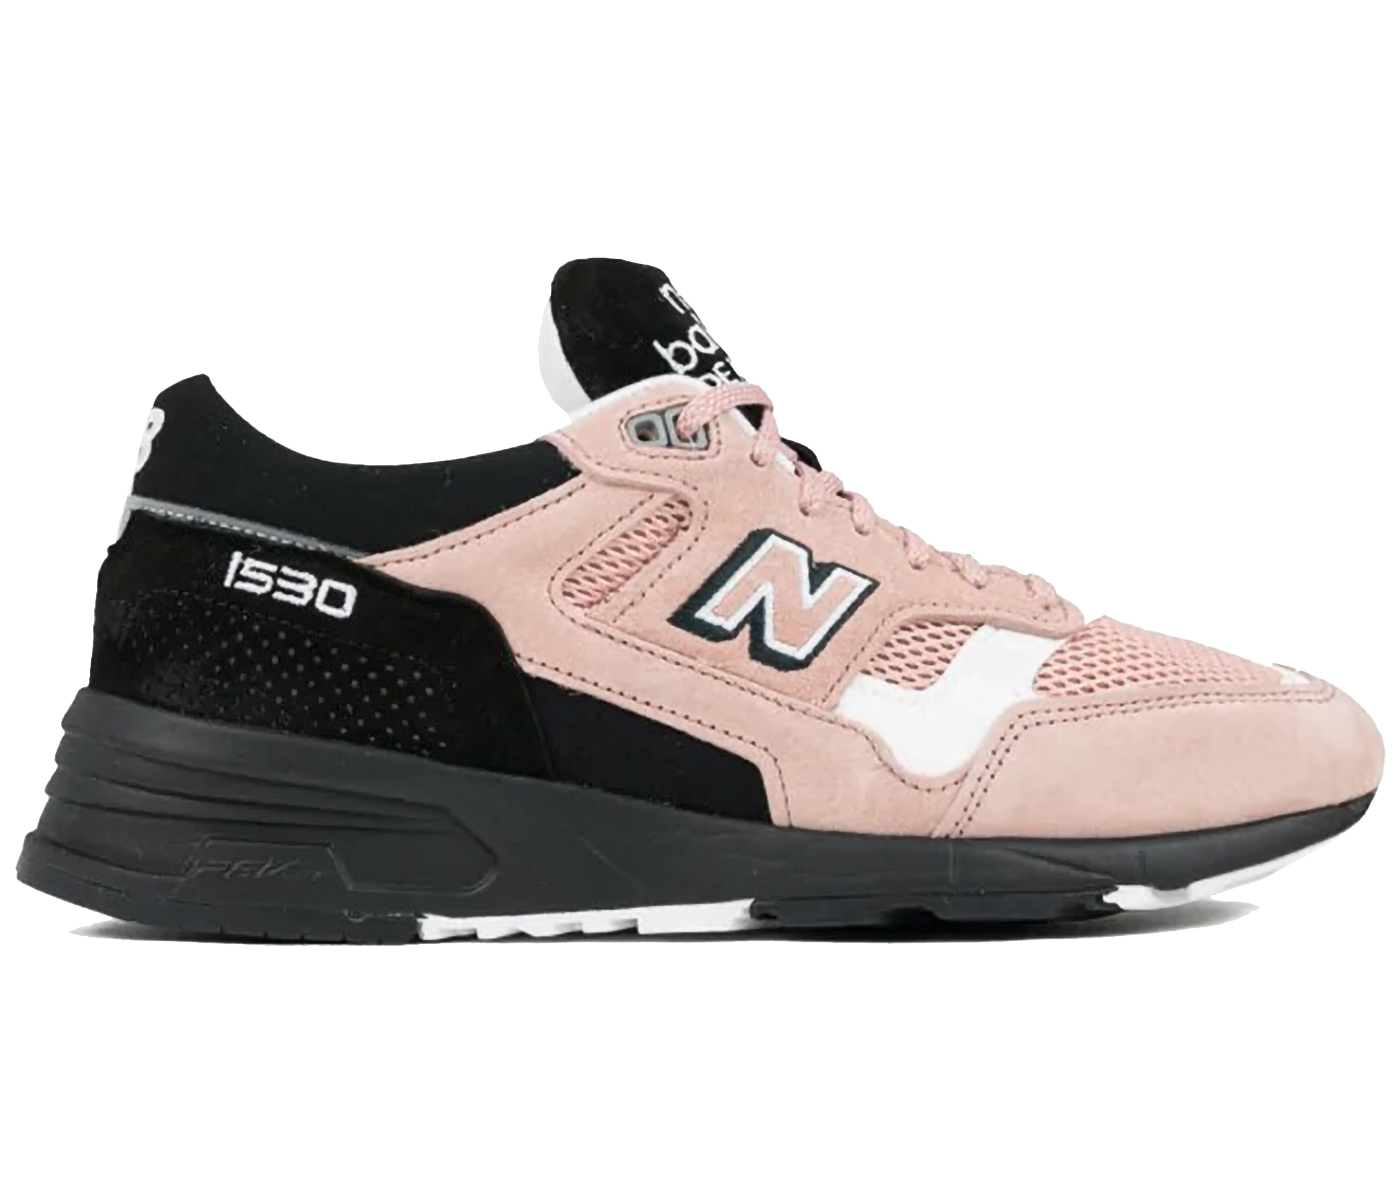 New Balance 1530 Made in England Pink Black